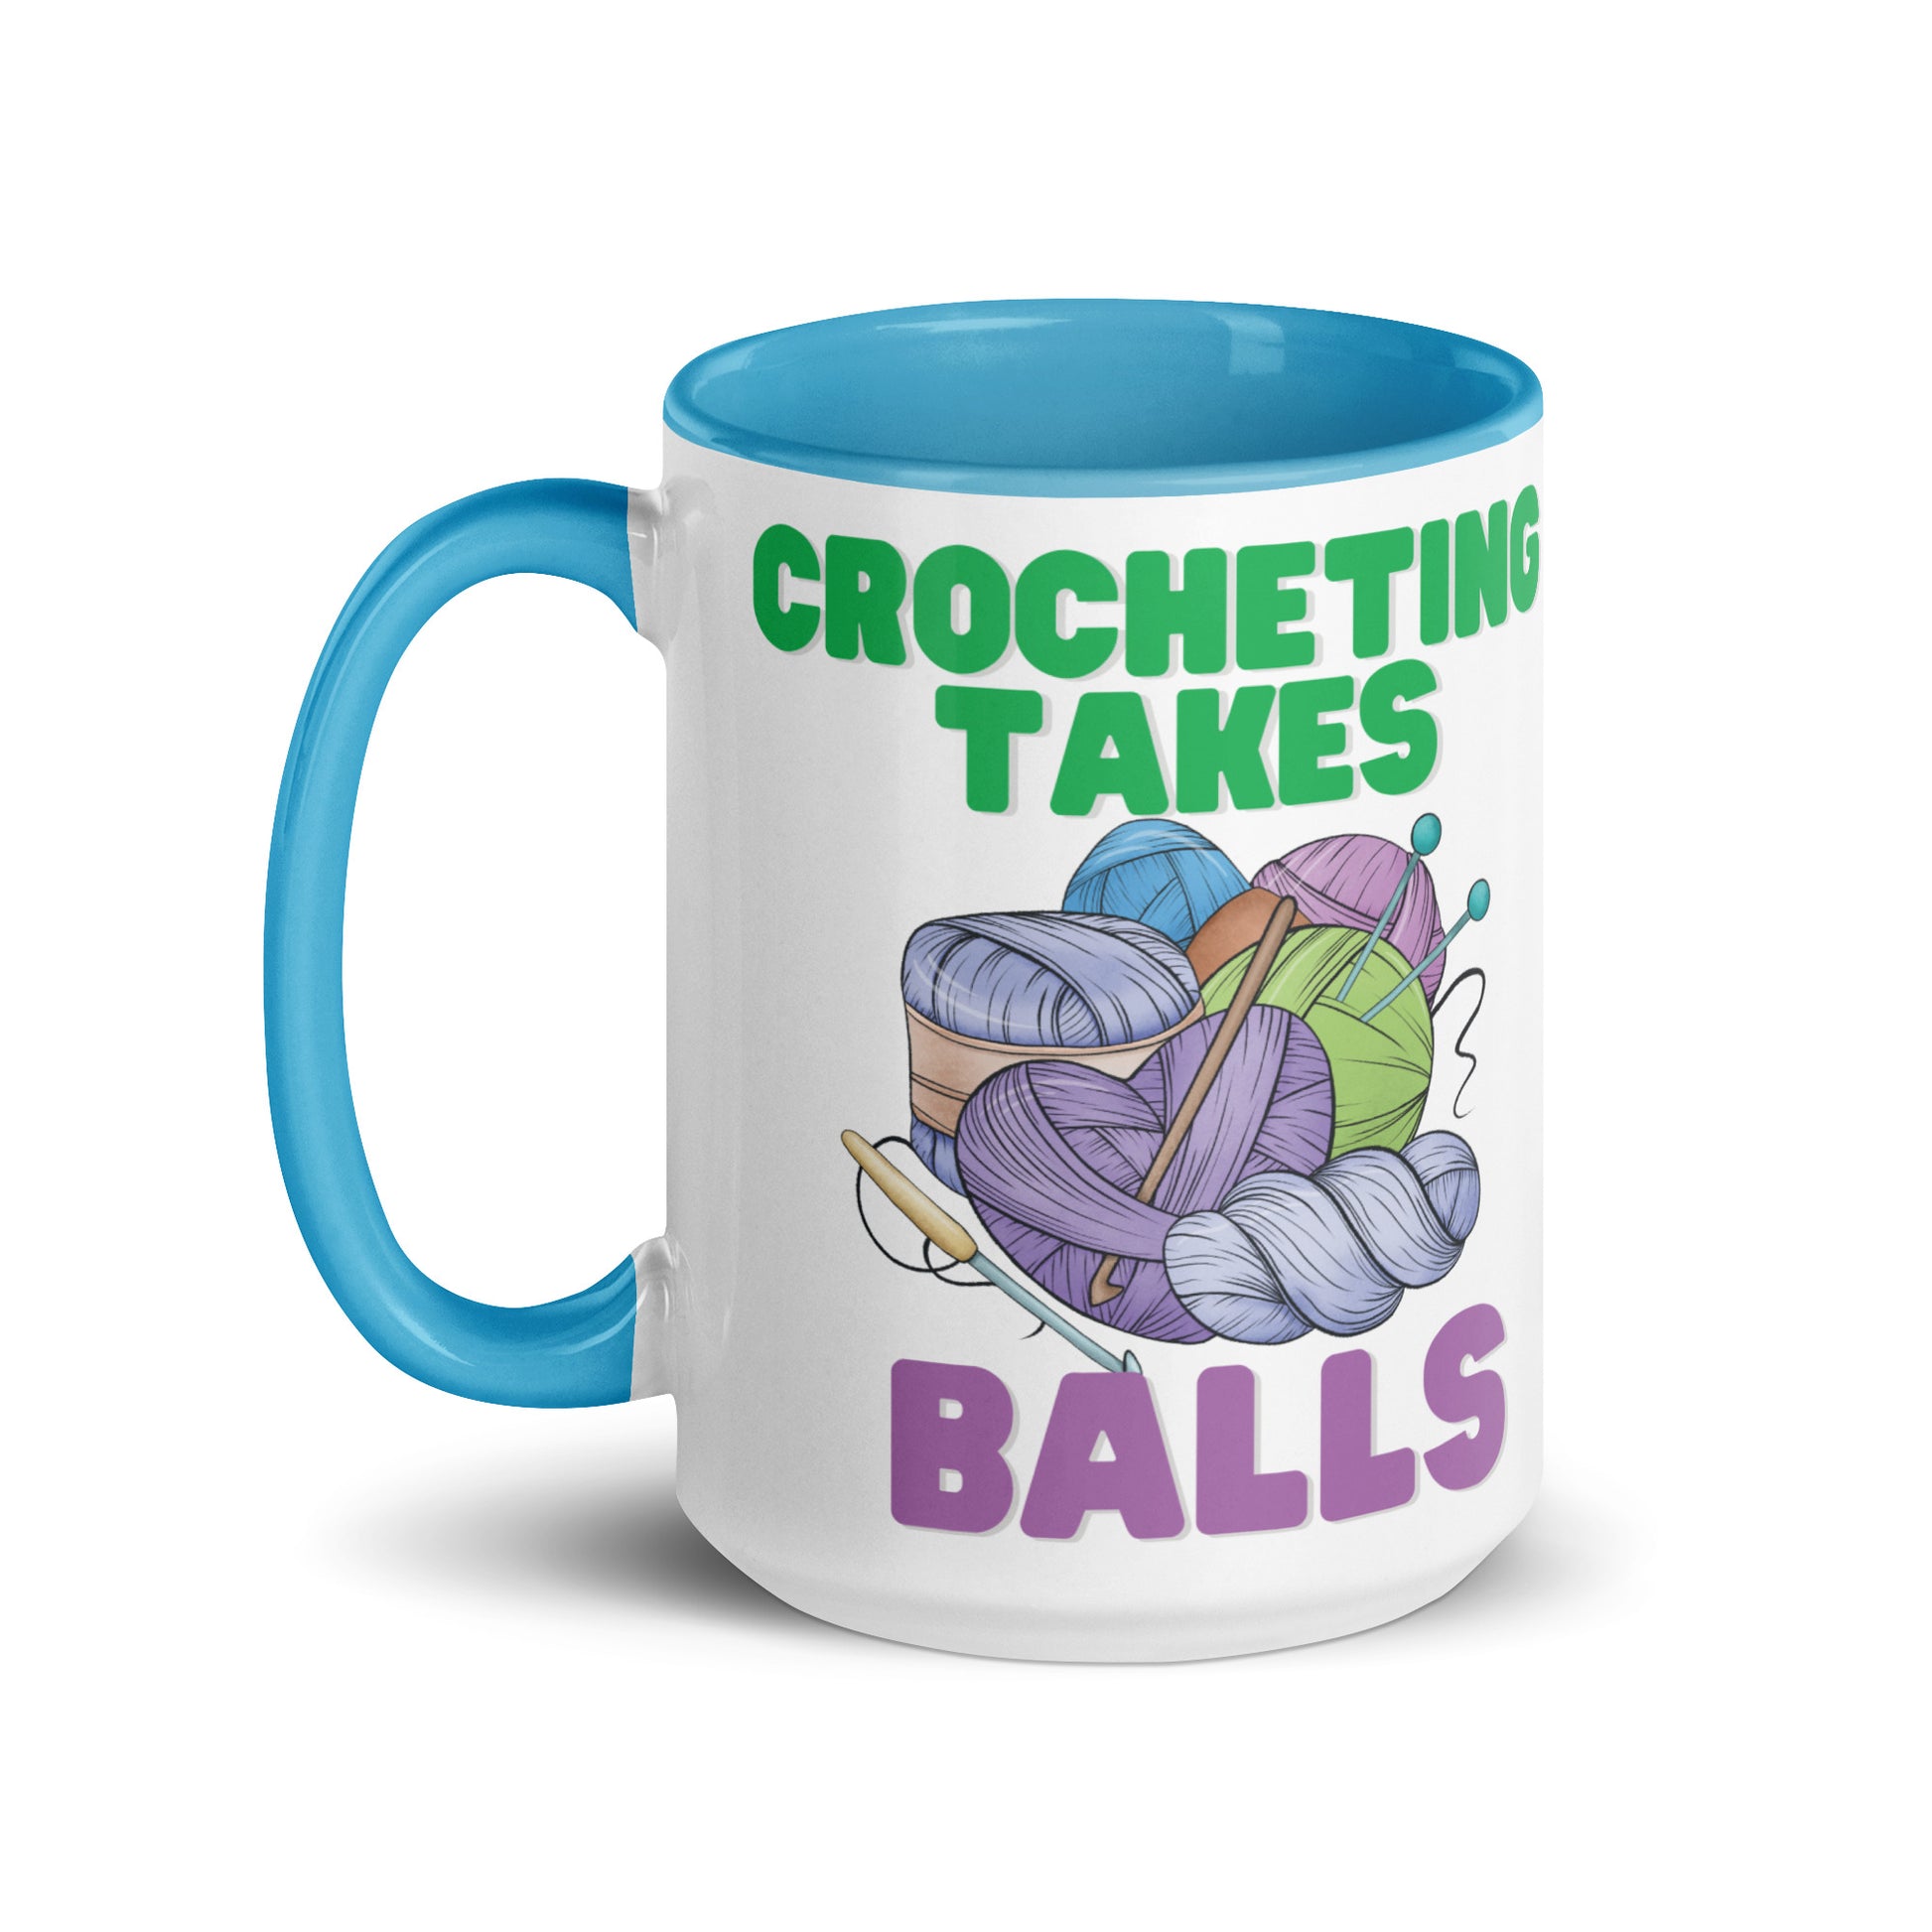 Crocheting Takes Balls Funny Mug with Color Inside CedarHill Country Market